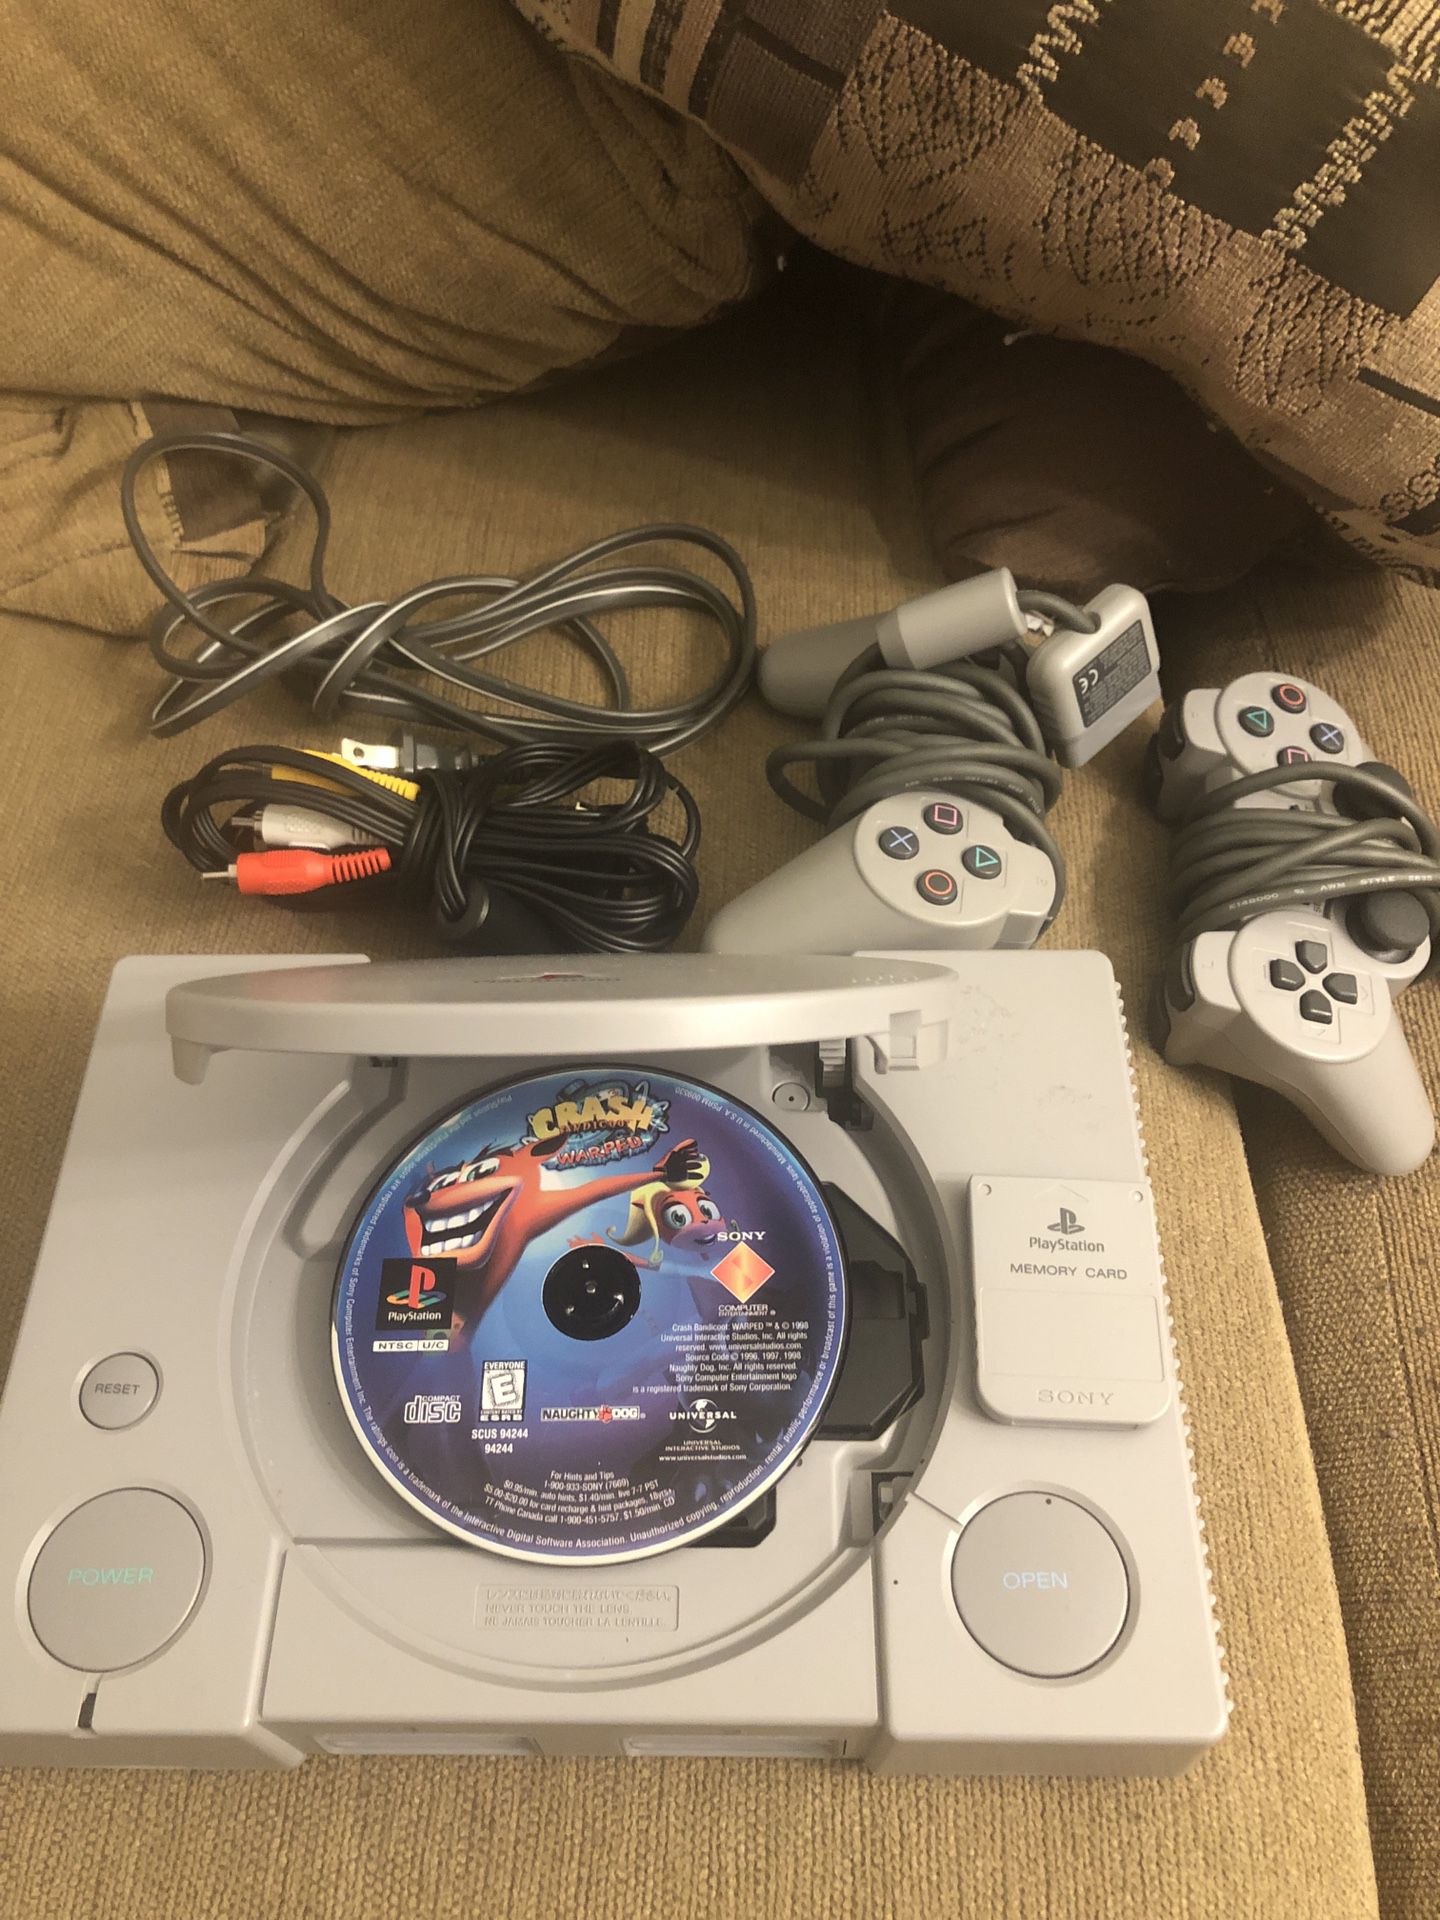 Sony PlayStation with 2 controllers, Memory Card and Crash Bandicoot